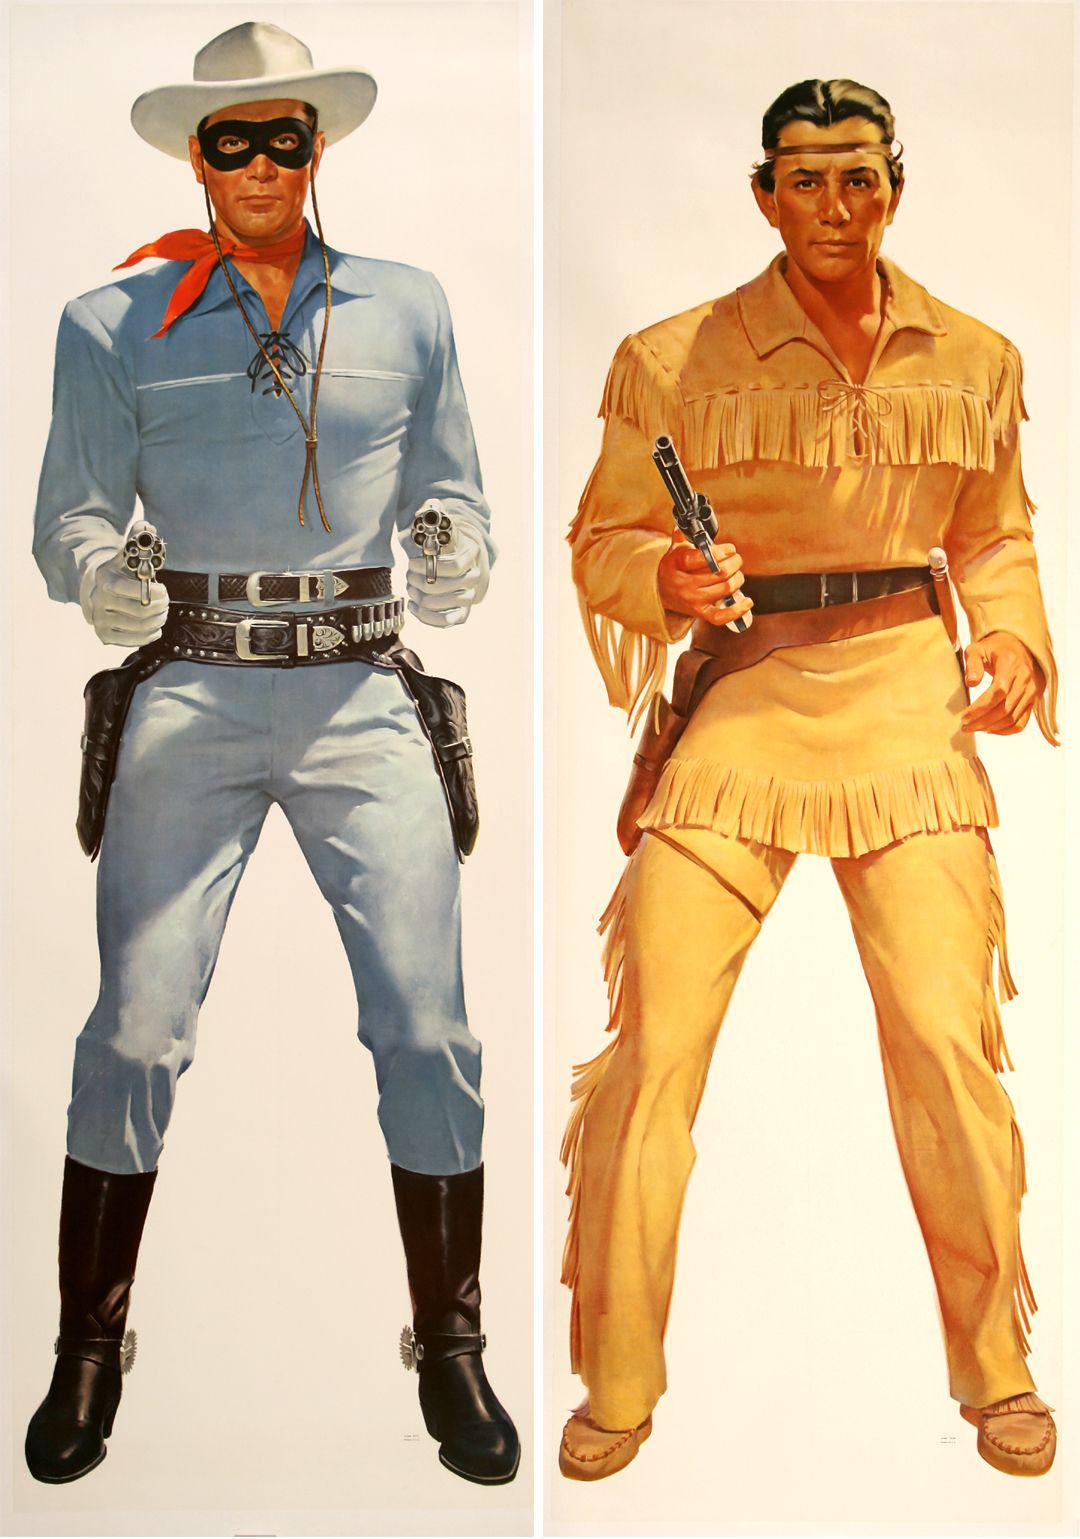 Set of Original Vintage Posters - The Lone Ranger And Tonto 1957